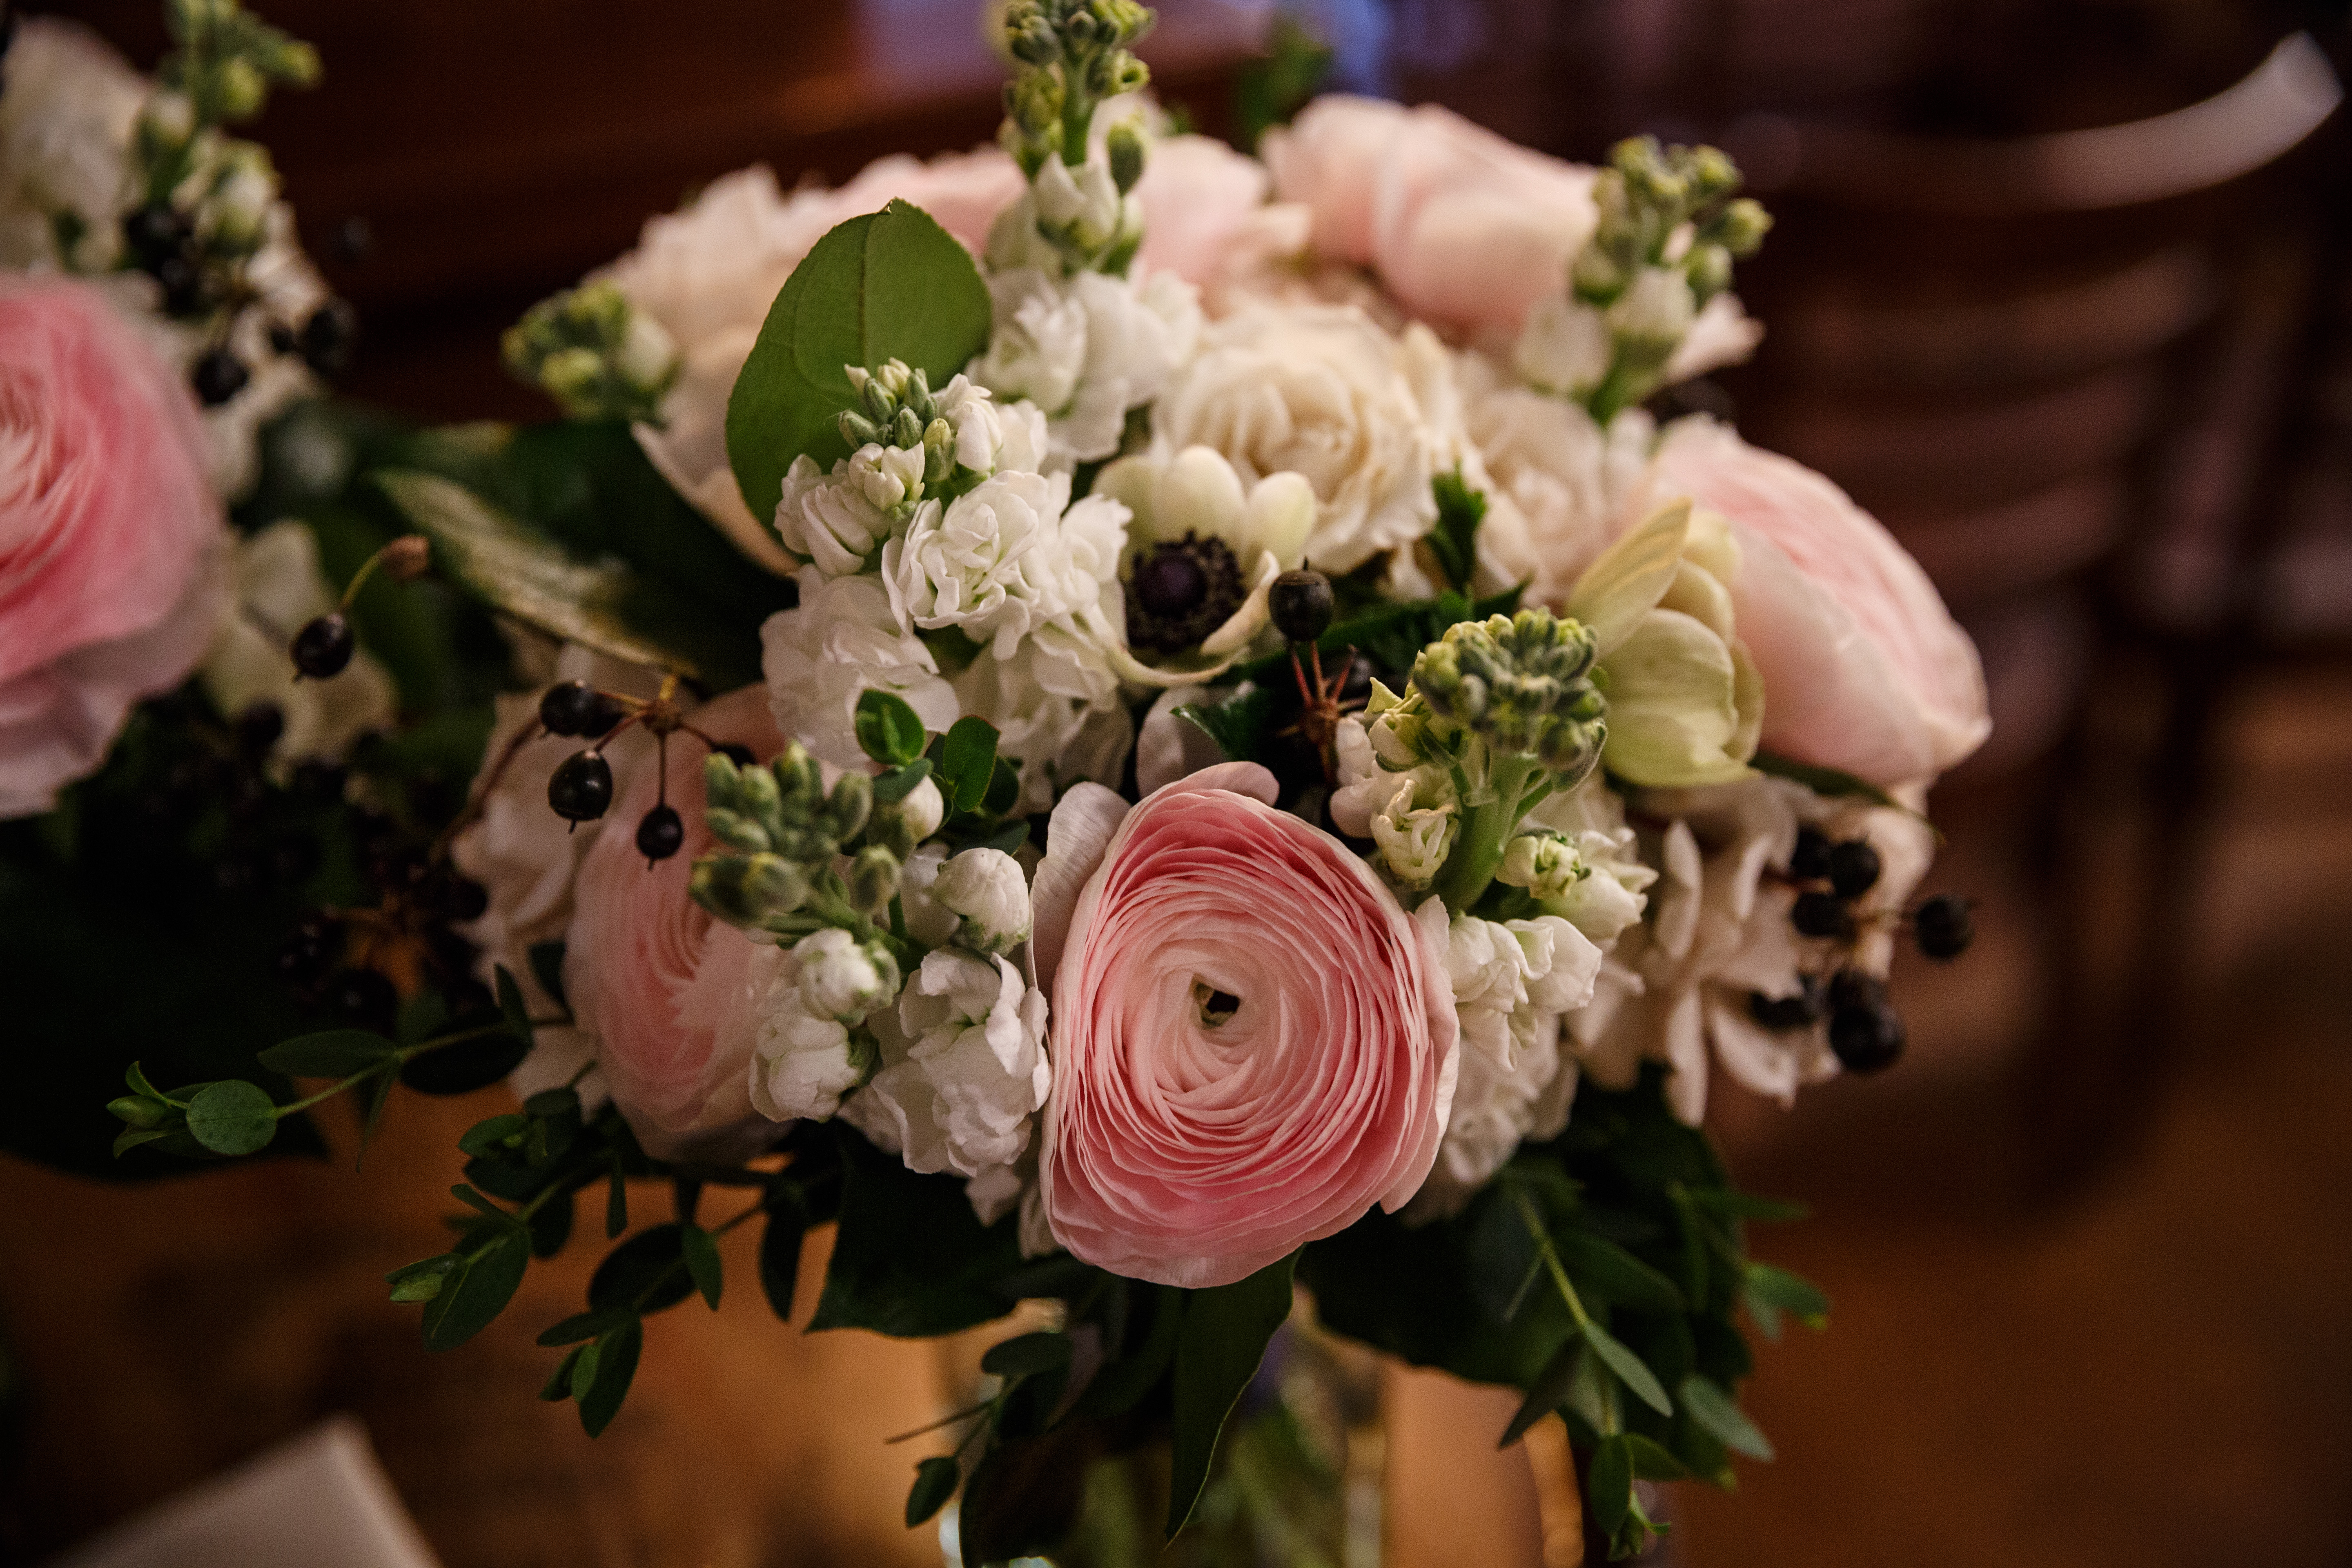 Ranunculus petals never get old, and this pink variety stole the show in the bride’s garden-inspired bouquet.